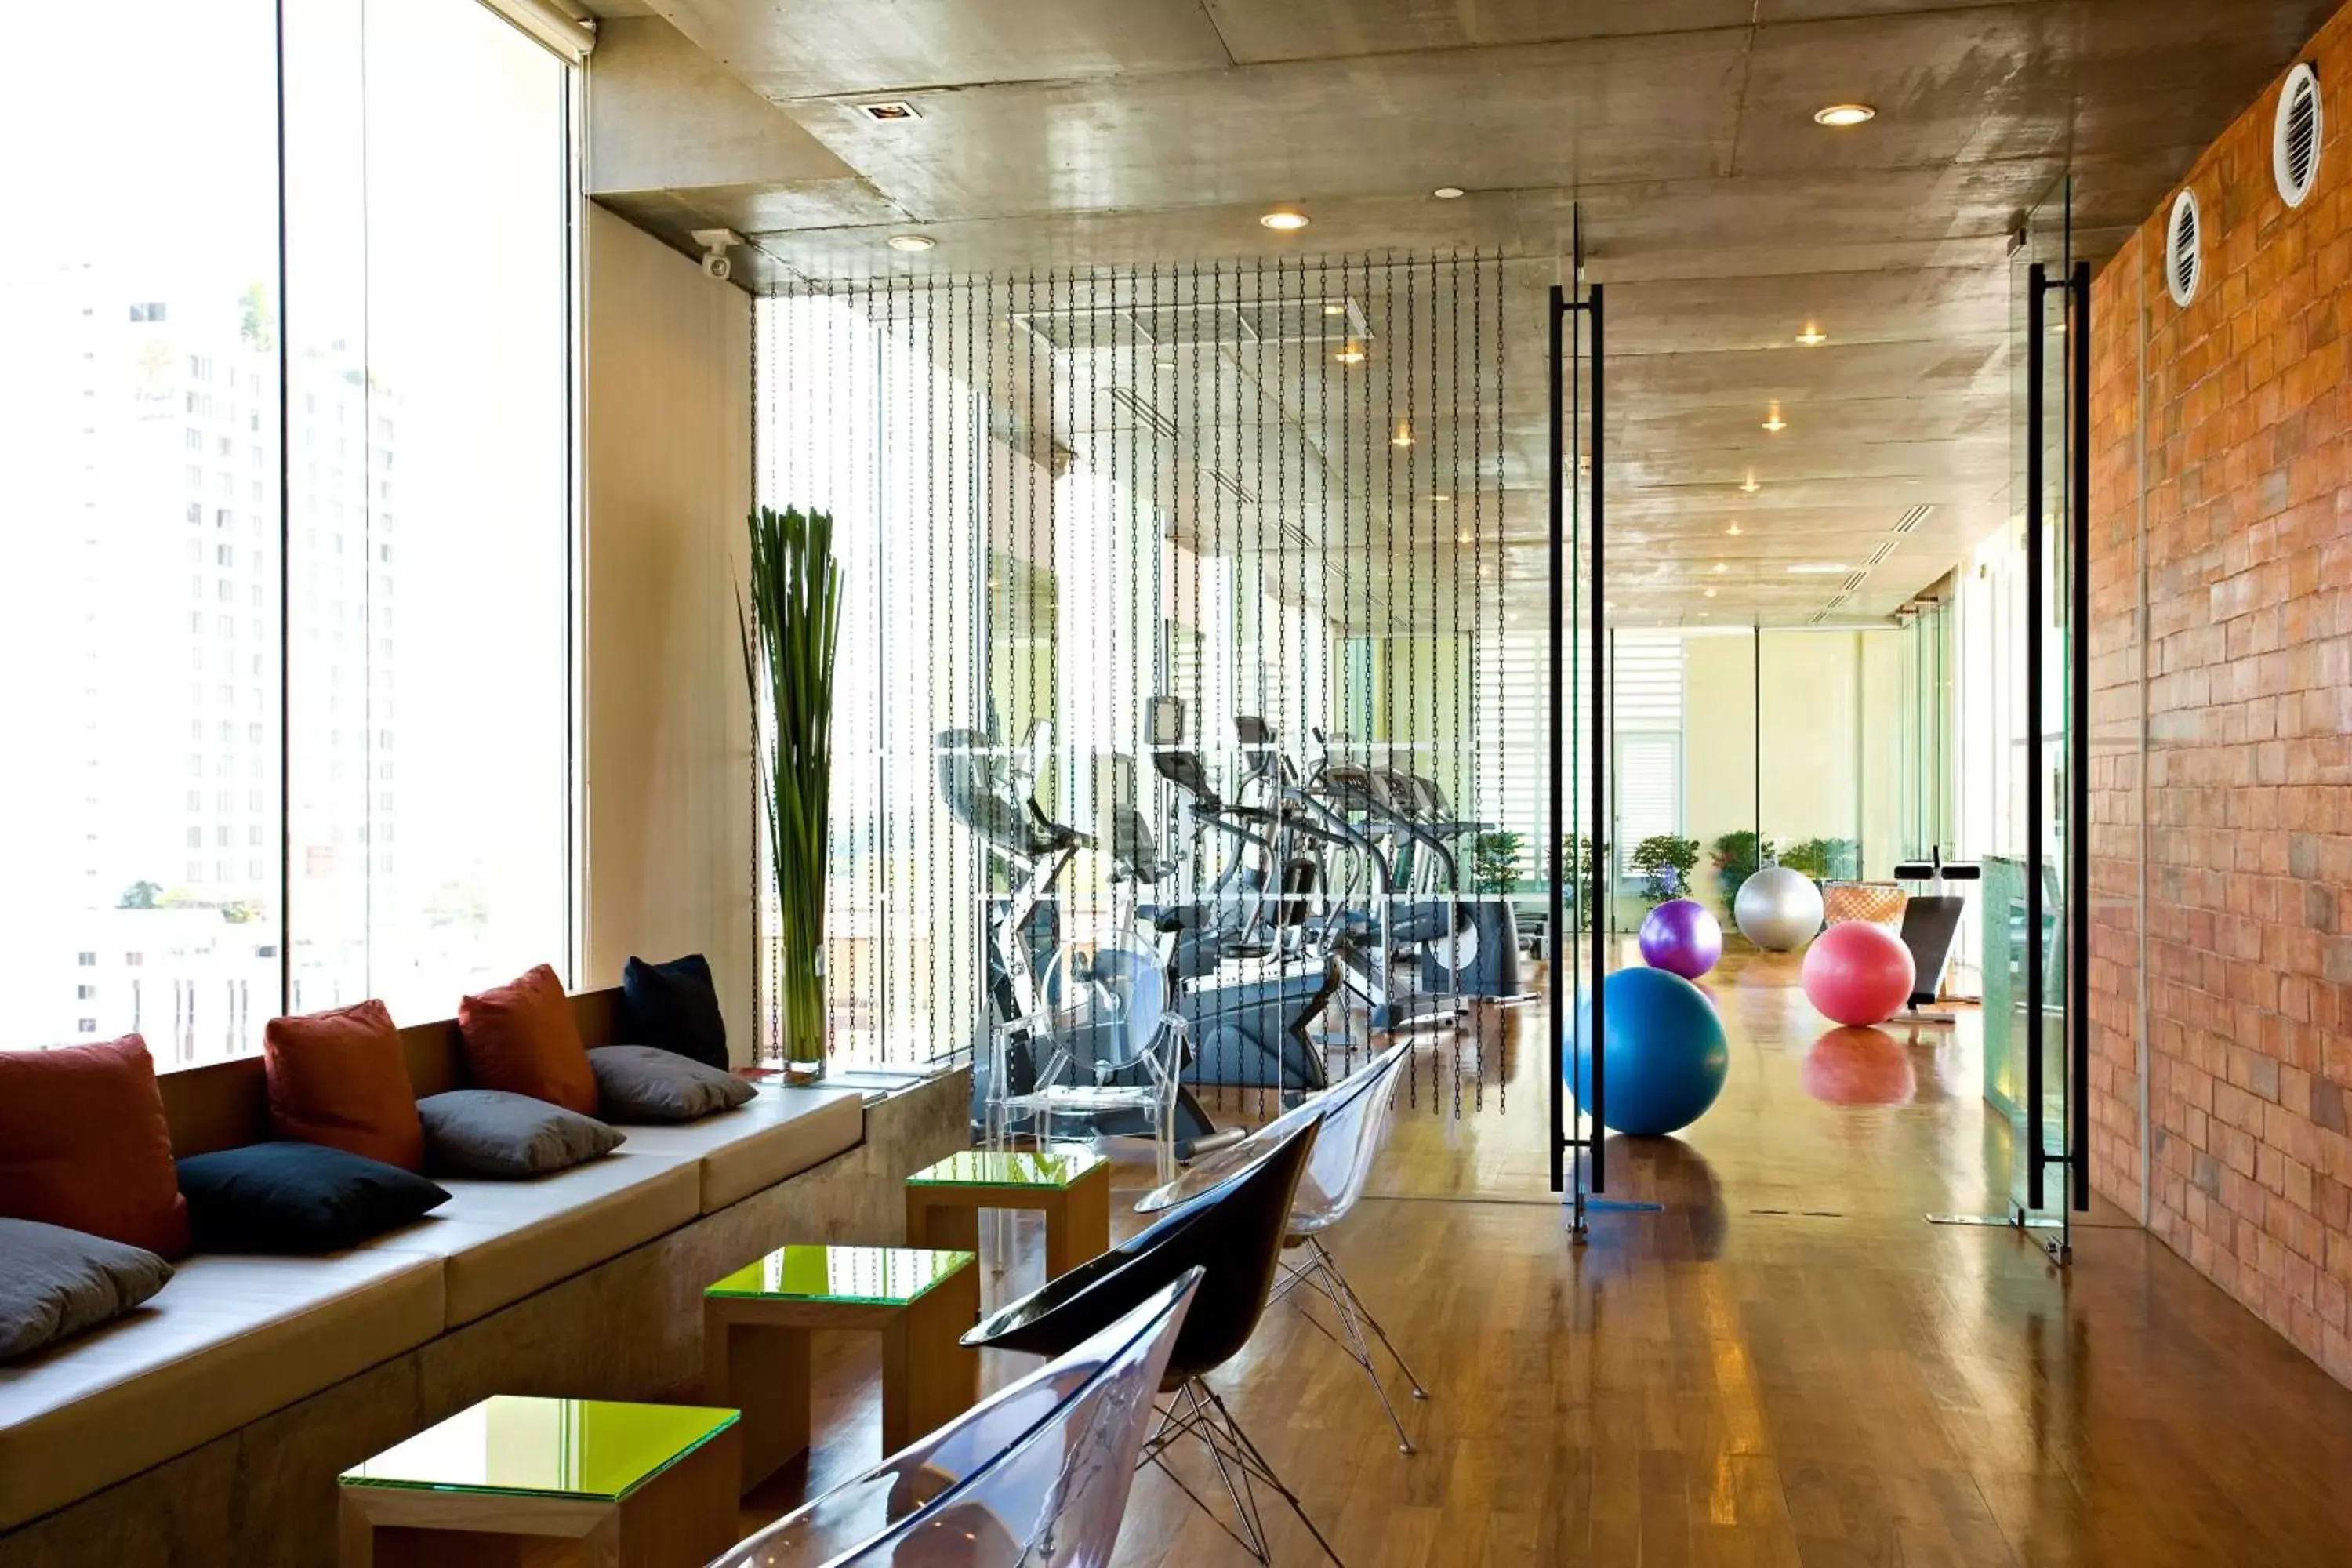 Fitness centre/facilities in dusitD2 Chiang Mai